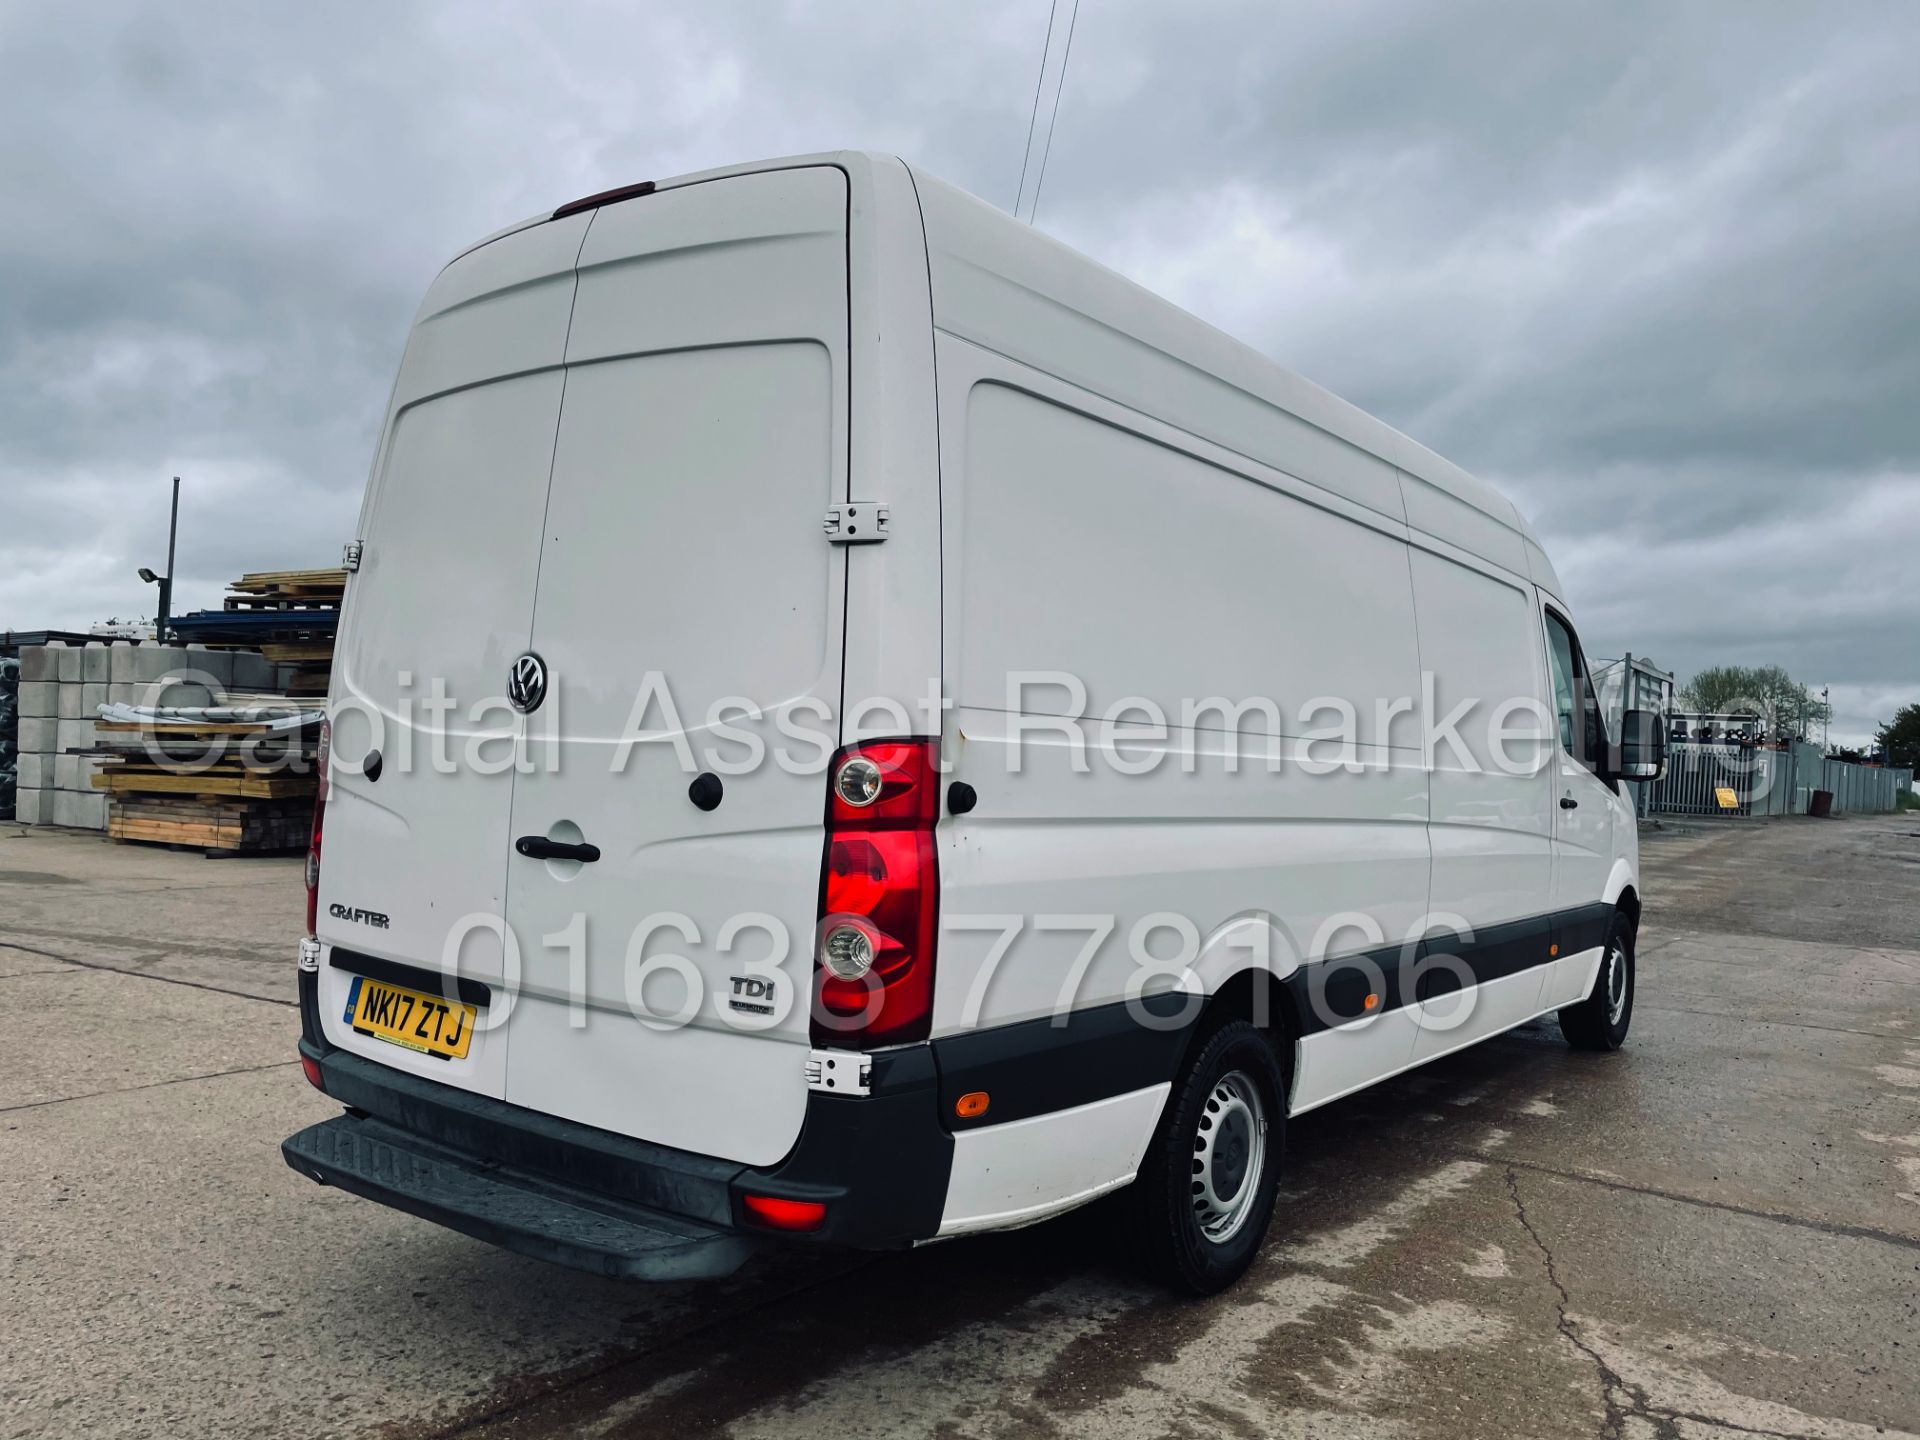 (On Sale) VOLKSWAGEN CRAFTER *LWB HI-ROOF* (2017 - EURO 6) '2.0 TDI BMT - 6 SPEED' *CRUISE CONTROL* - Image 12 of 39